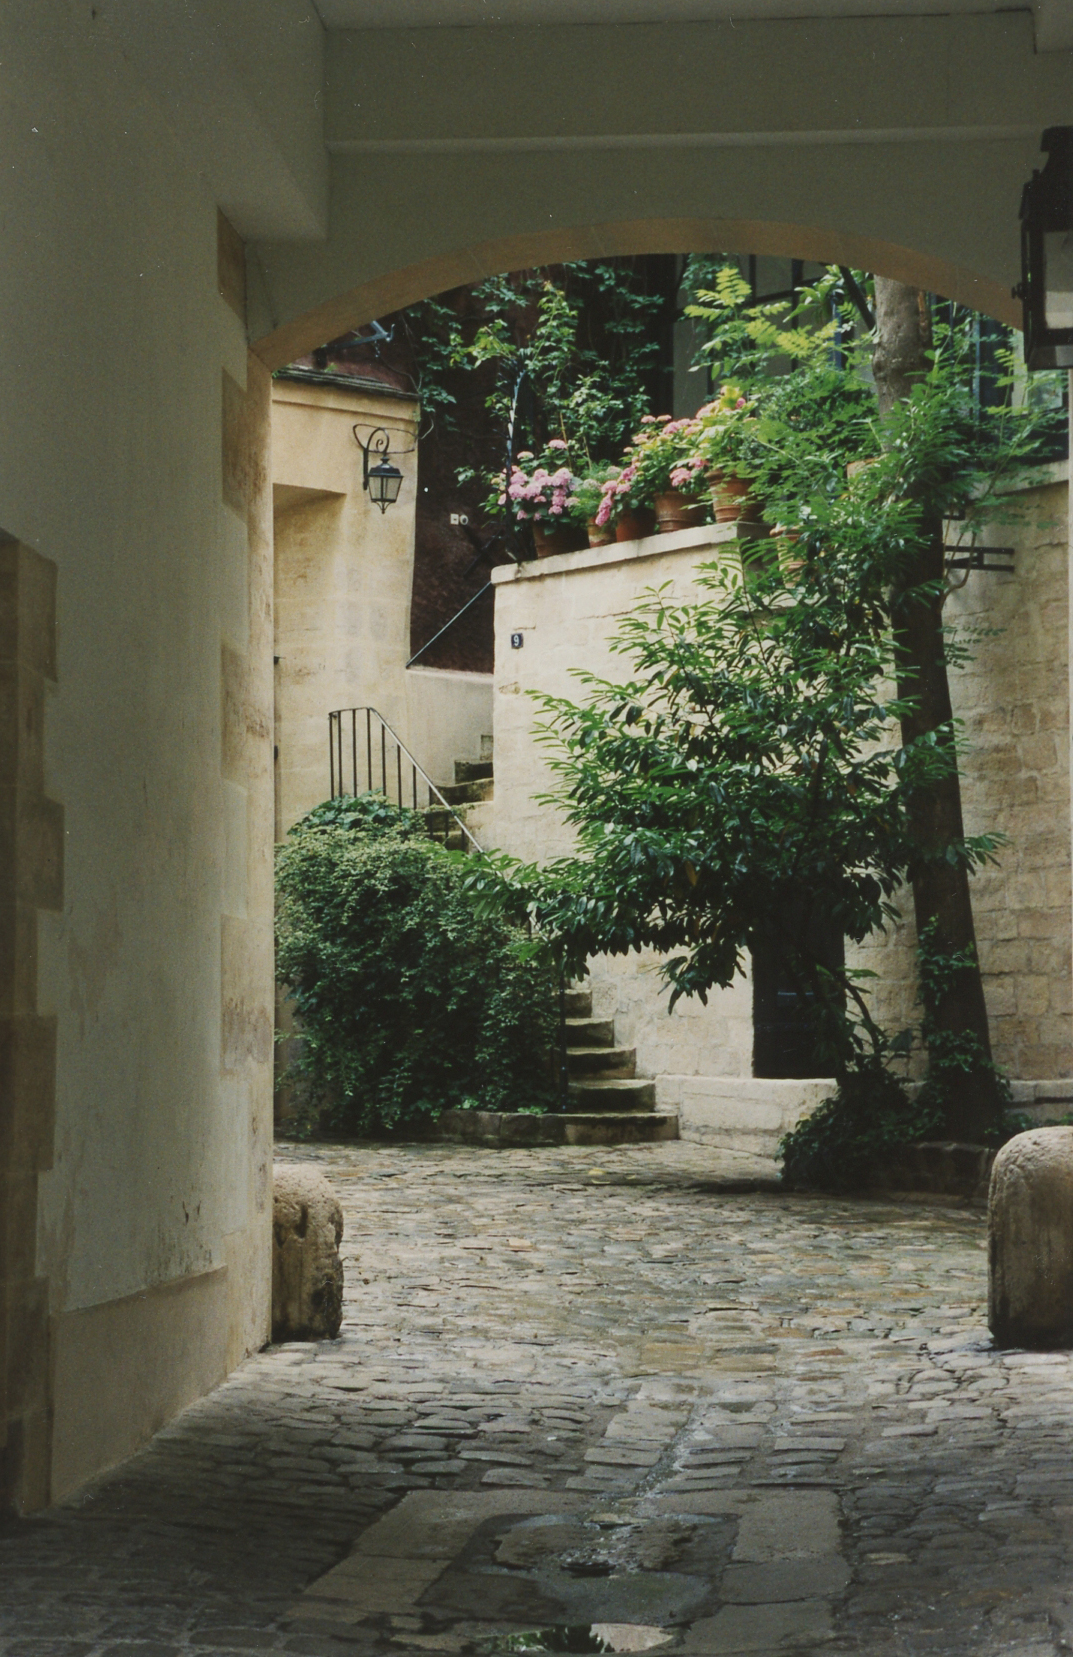 Cour de Rohan, a series of three charming interconnecting courtyards originating in the 16th century (this building's exterior view was used for Gigi's apartment in the movie).Photo © 1998 Ann James Massey